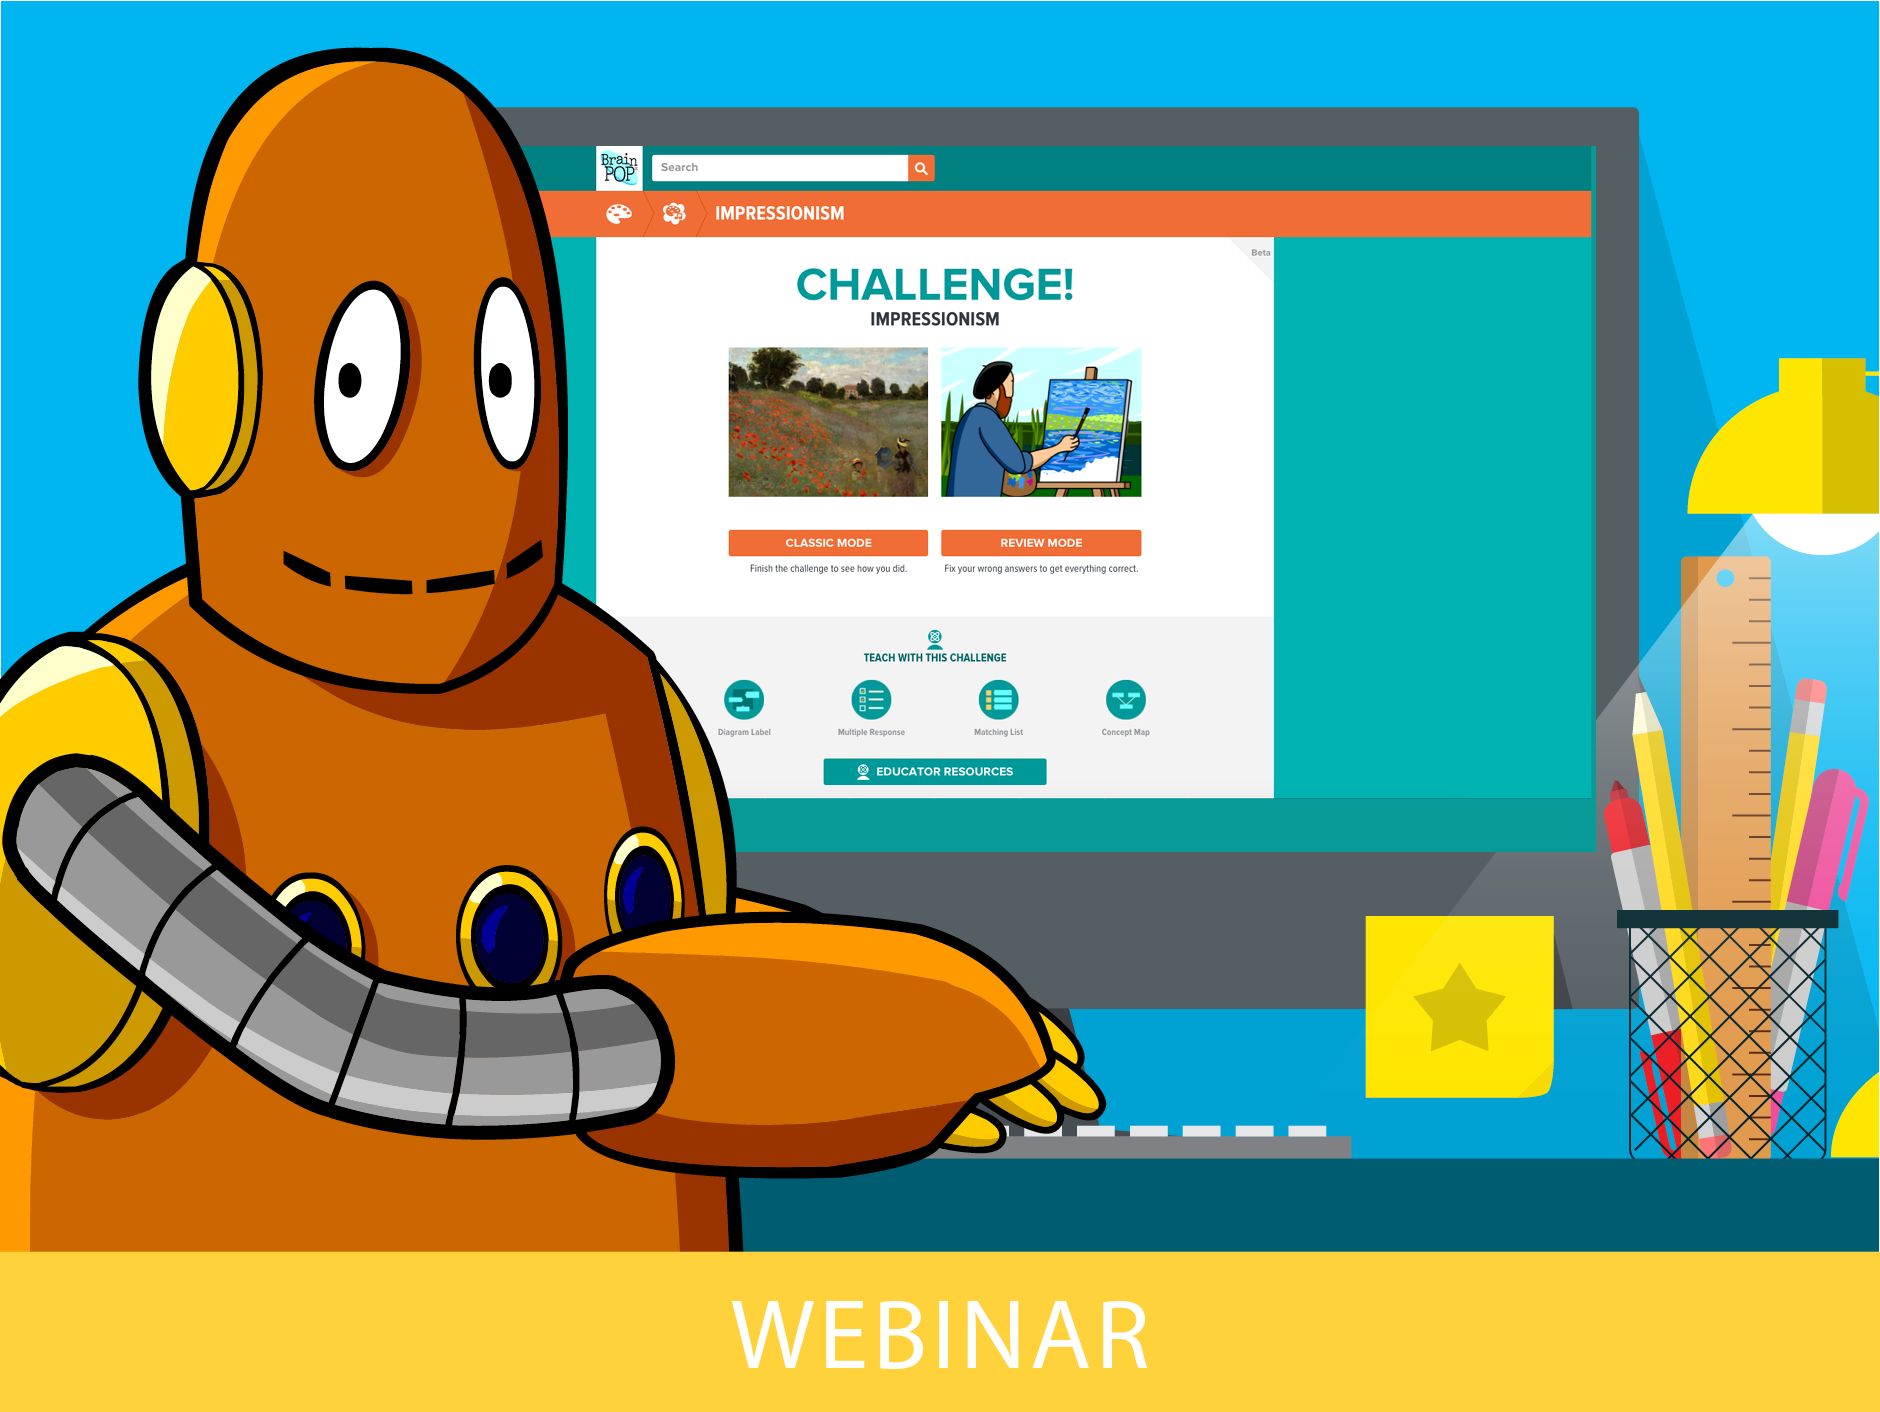 BrainPOP Presents Our Newest Feature: The Challenge